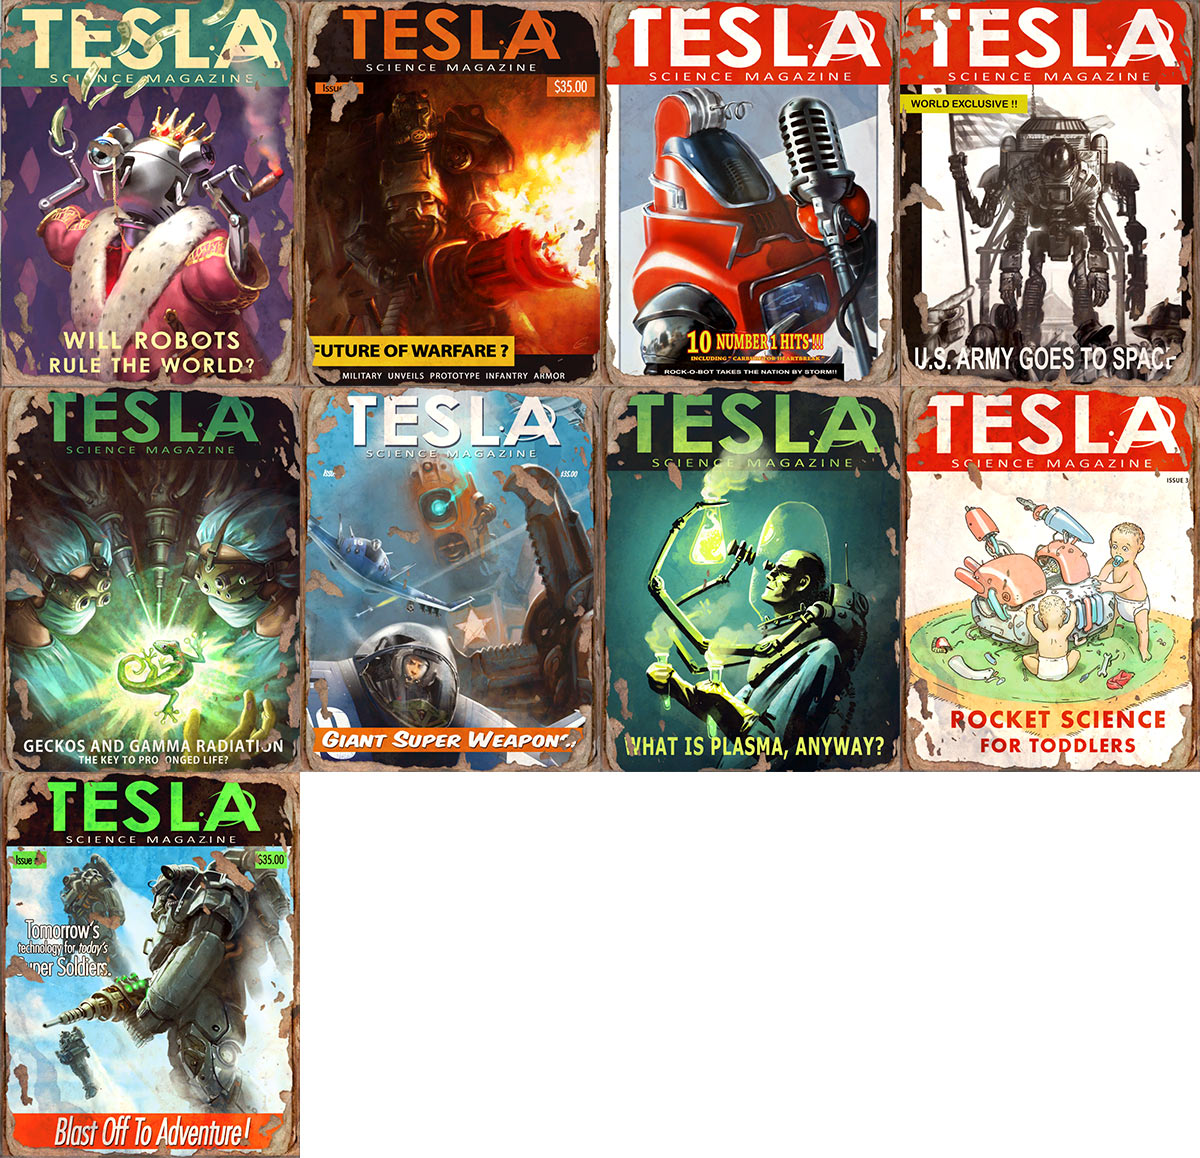 Fallout 76 - Tesla Science Magazines in Fallout 76